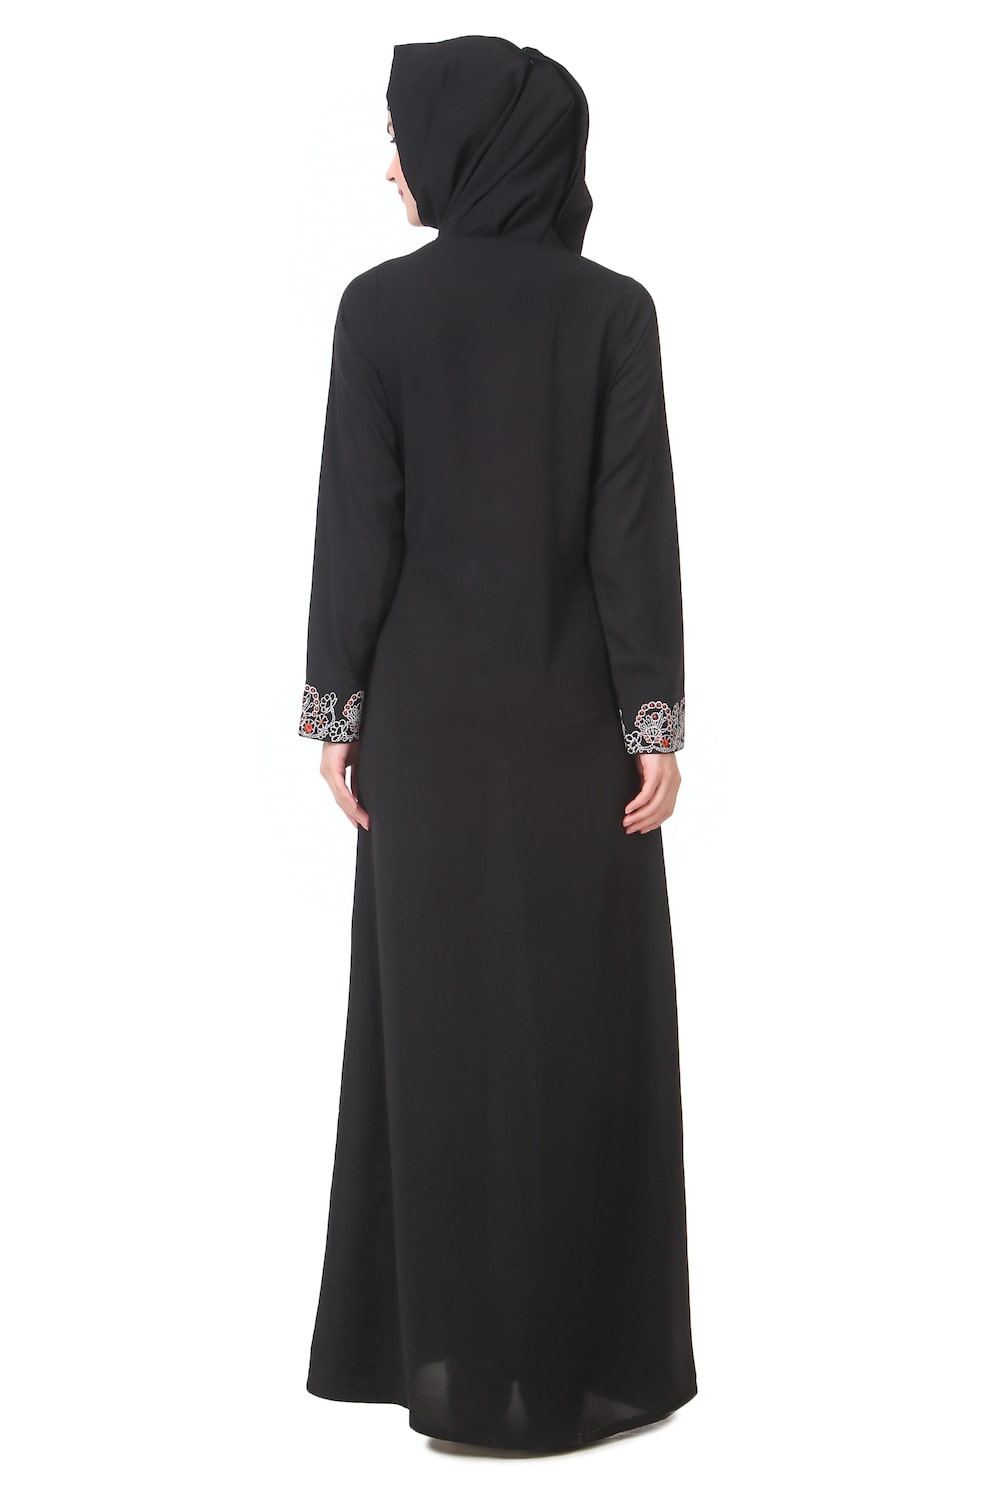 Faux Buttoned Front Paisley Embroidered Abaya